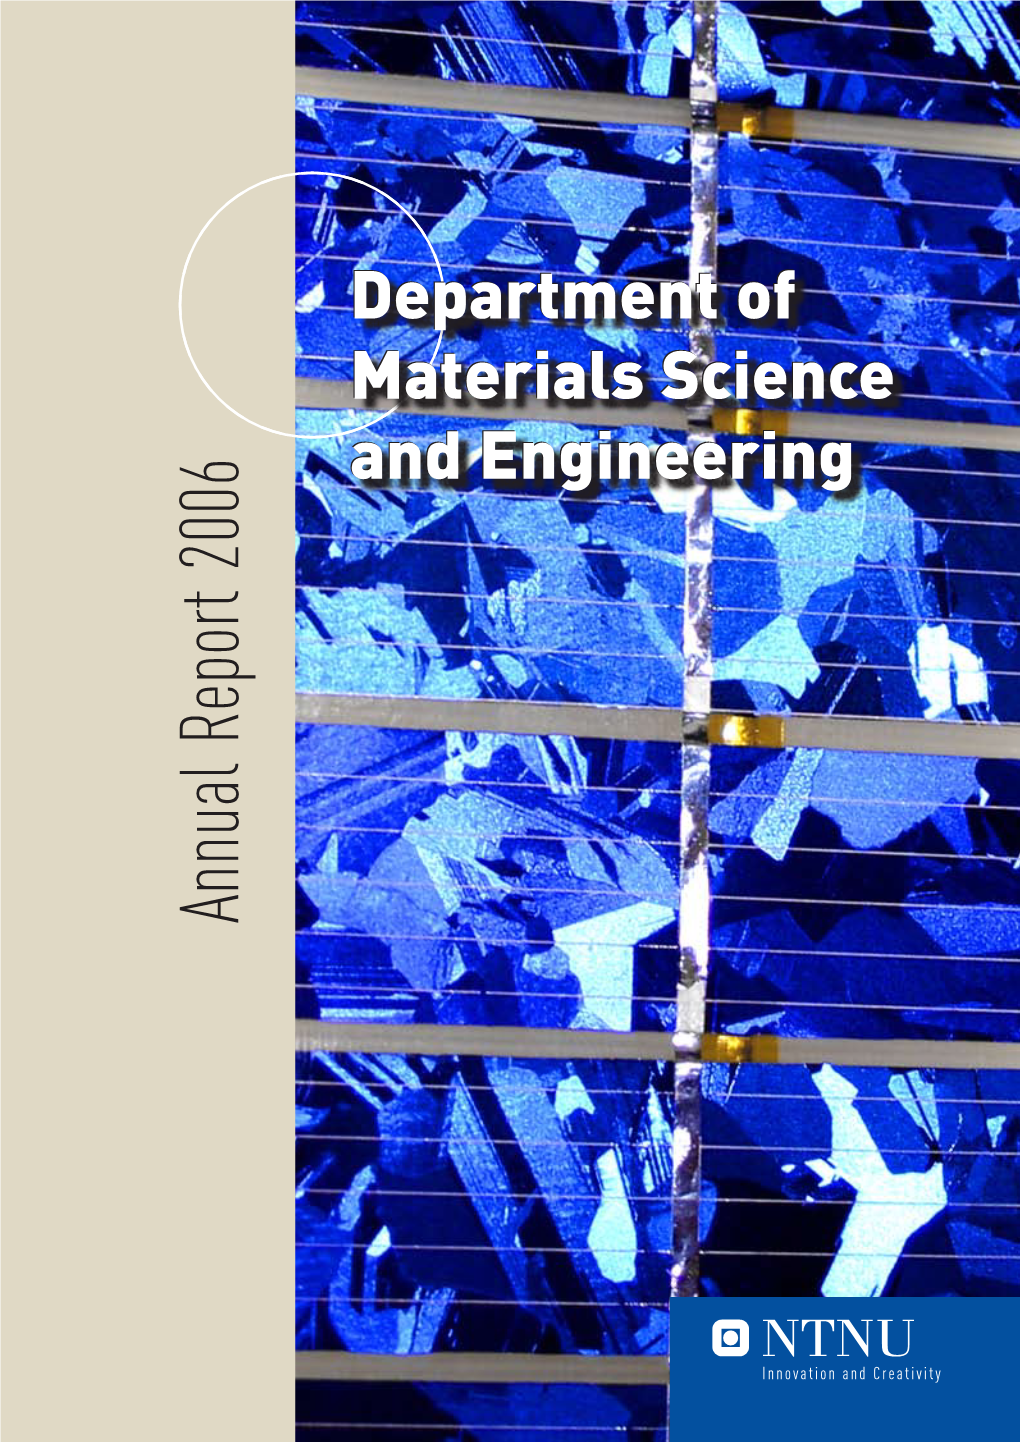 Annual Report 2006 and Engineering and Science Materials of Department and Engineering and Science Materials of Department Table of Contents